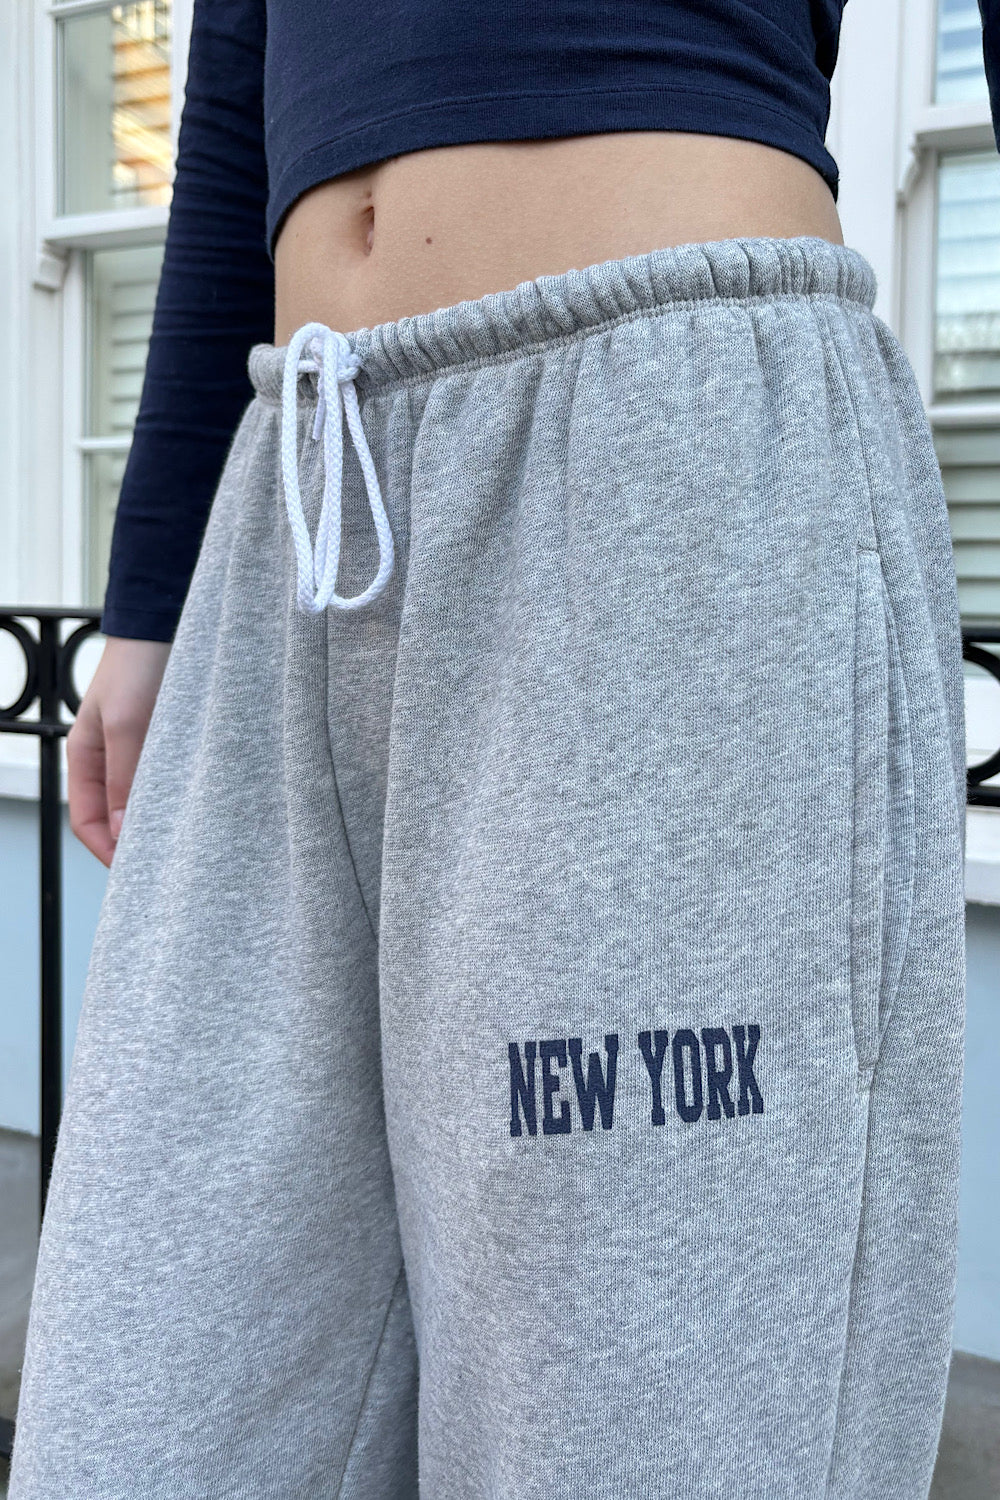 Brandy Melville Sweatpants Gray - $22 (37% Off Retail) - From Anna